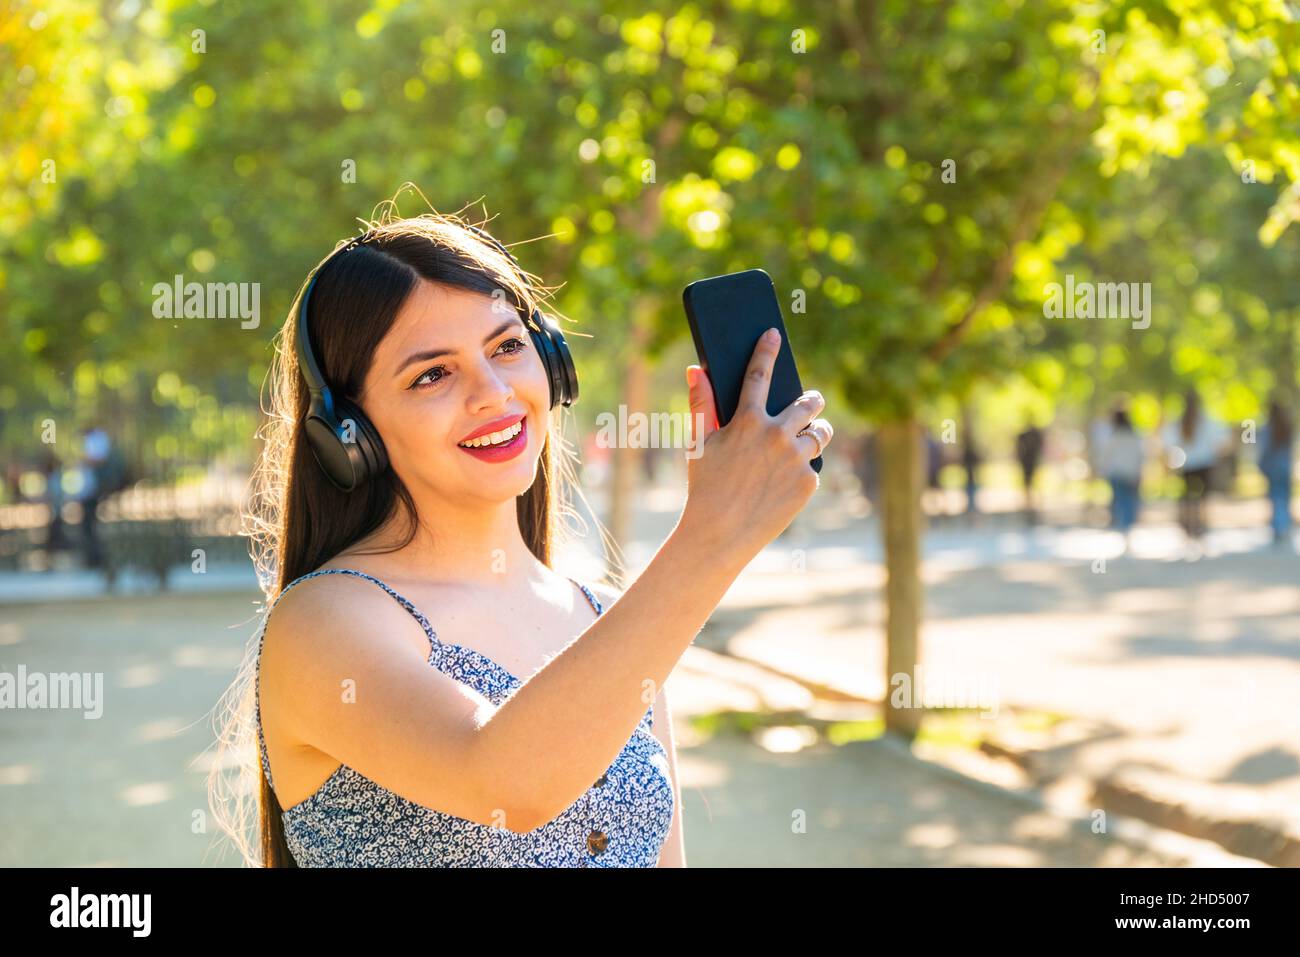 Young woman with long black hair using smart phone at park, taking a selfie. Stock Photo